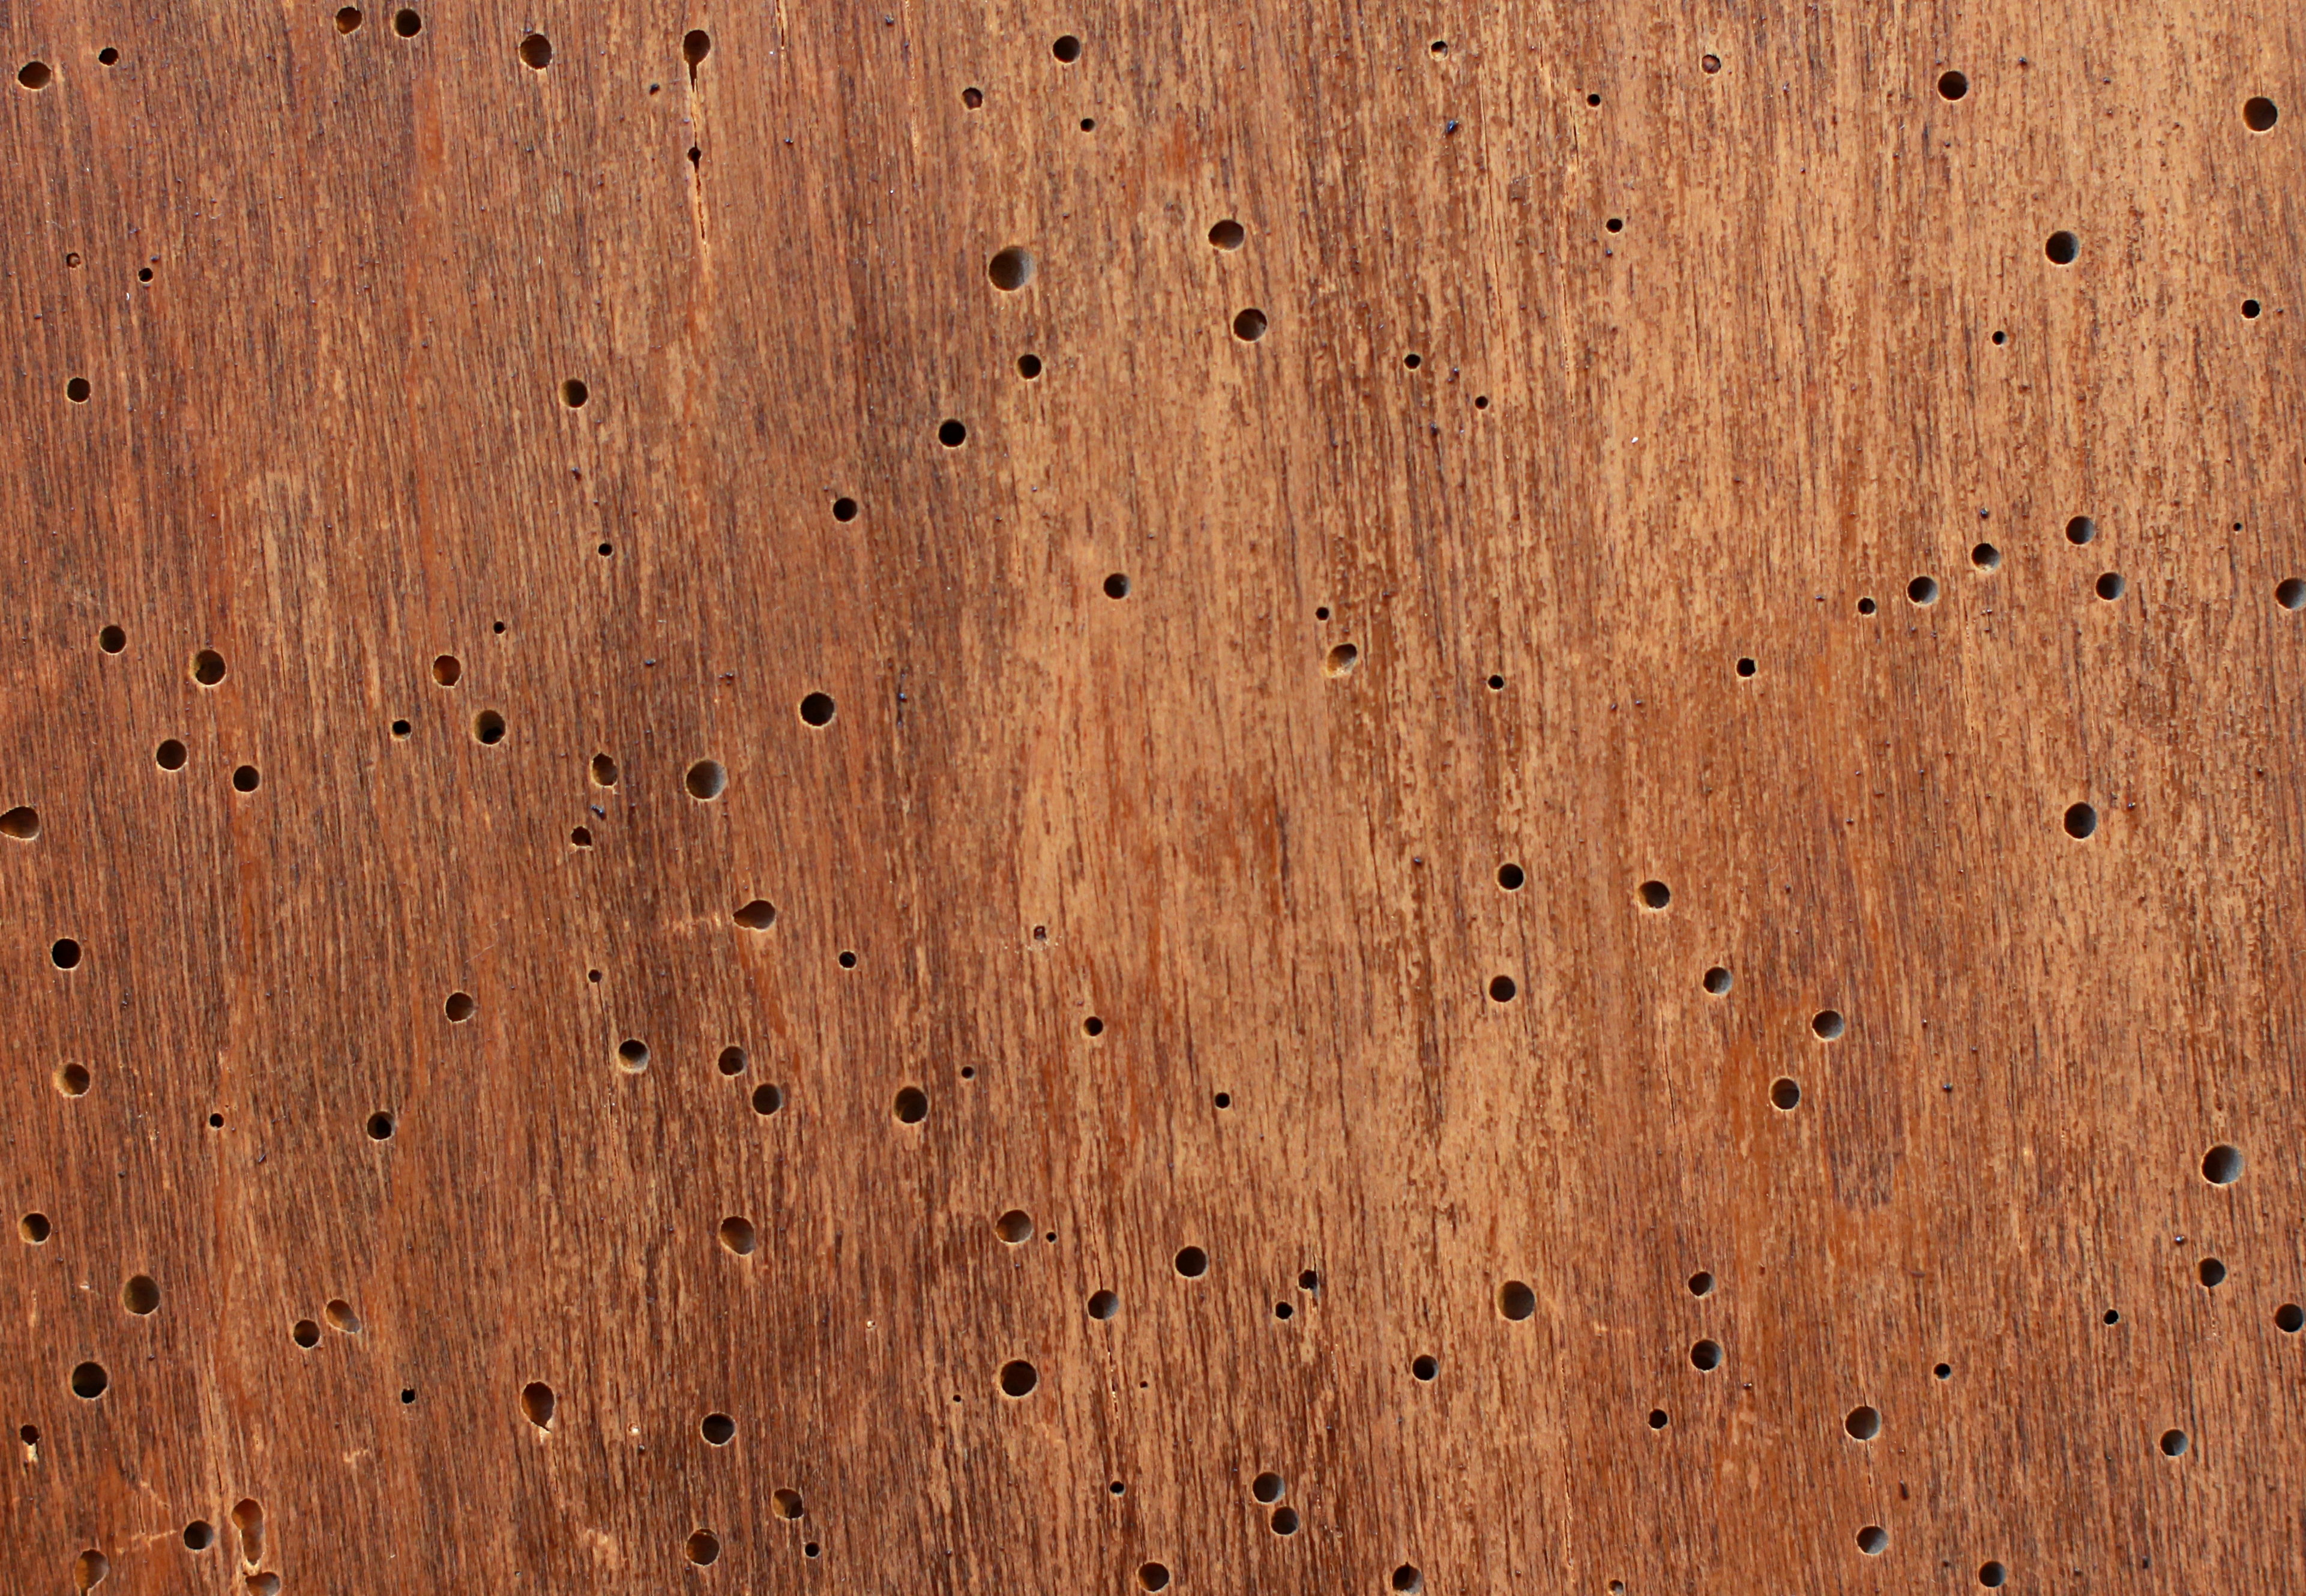 File:Wood texture with woodworm hole.jpg - Wikimedia Commons